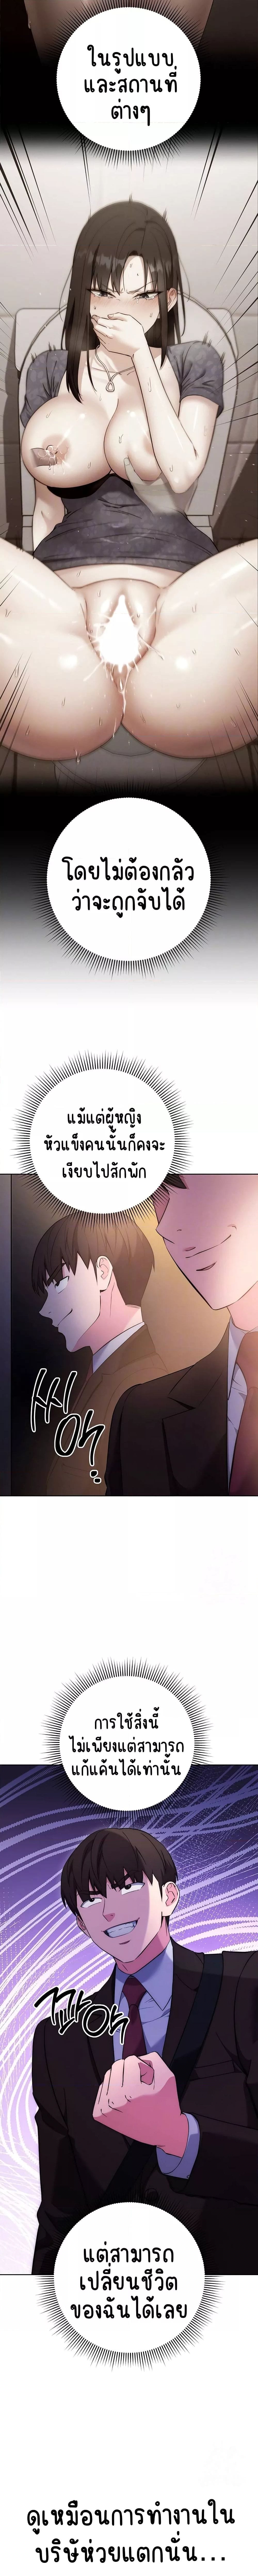 Outsider: The Invisible Man ตอนที่ 7 ภาพ 1